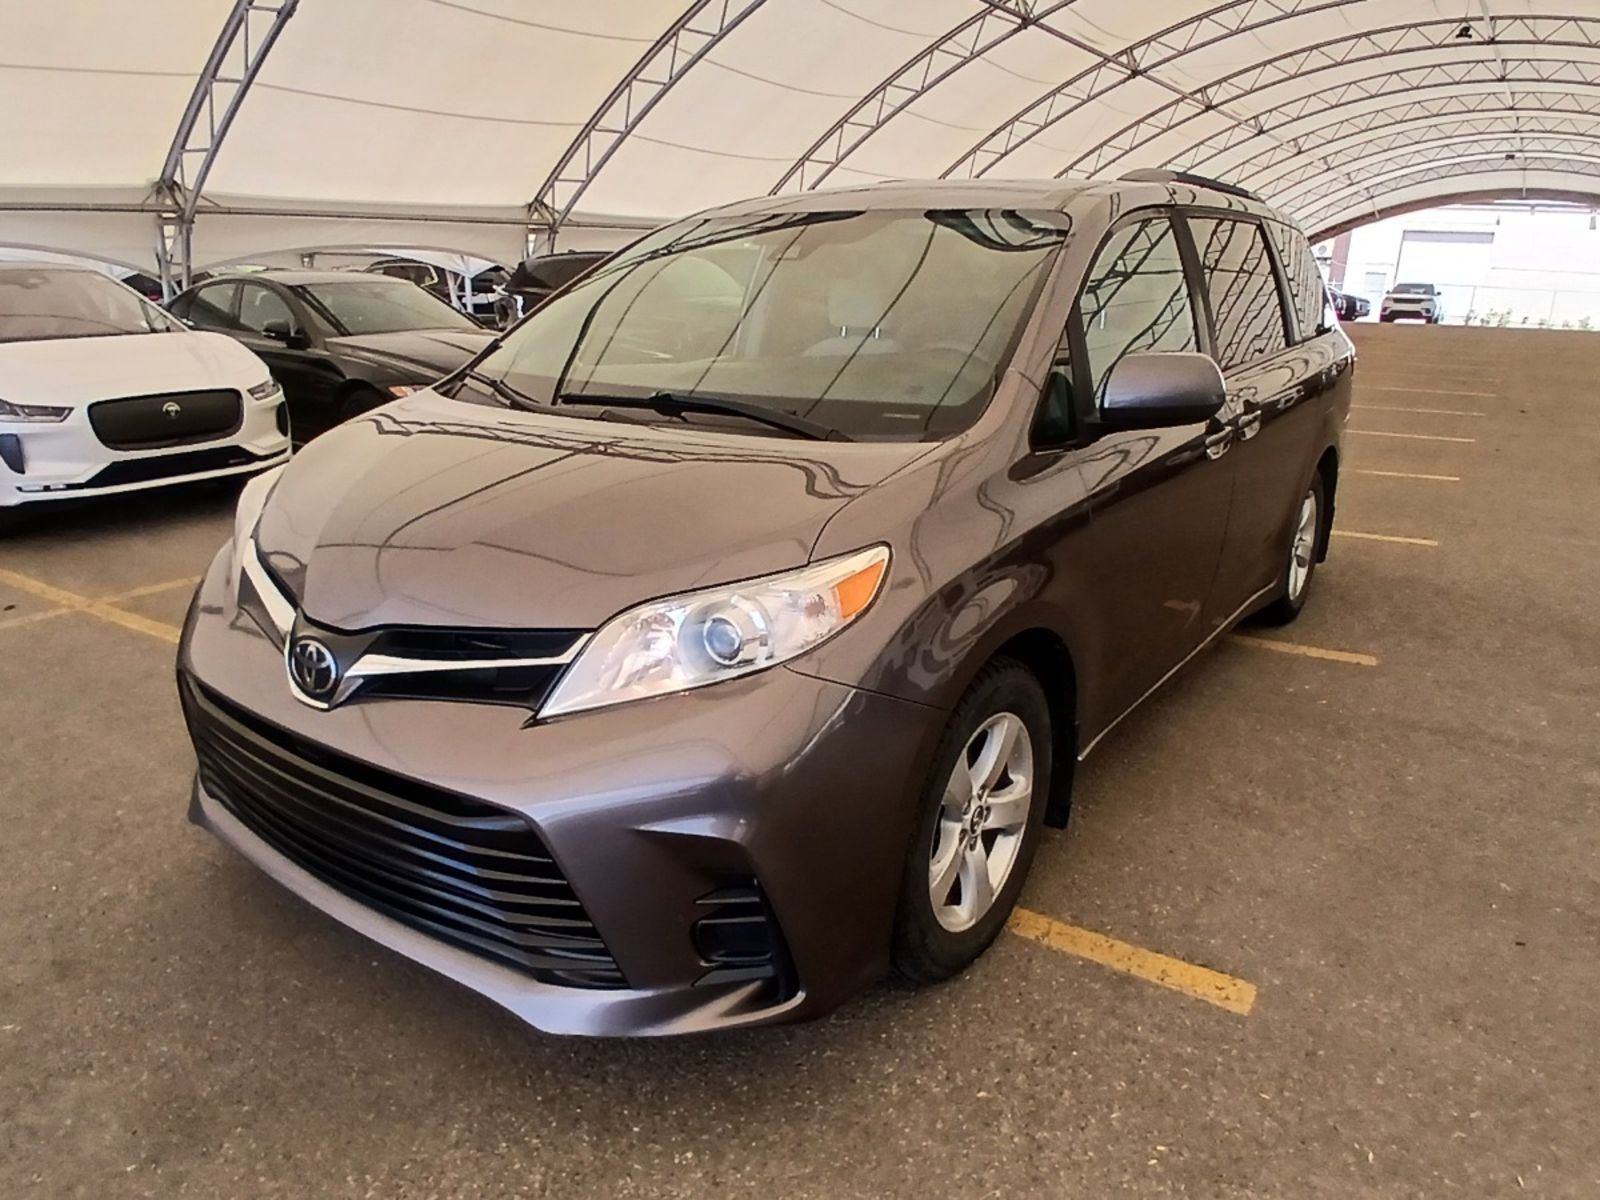 2019 Toyota Sienna LE - 3rd row seating, heated seats, bluetooth